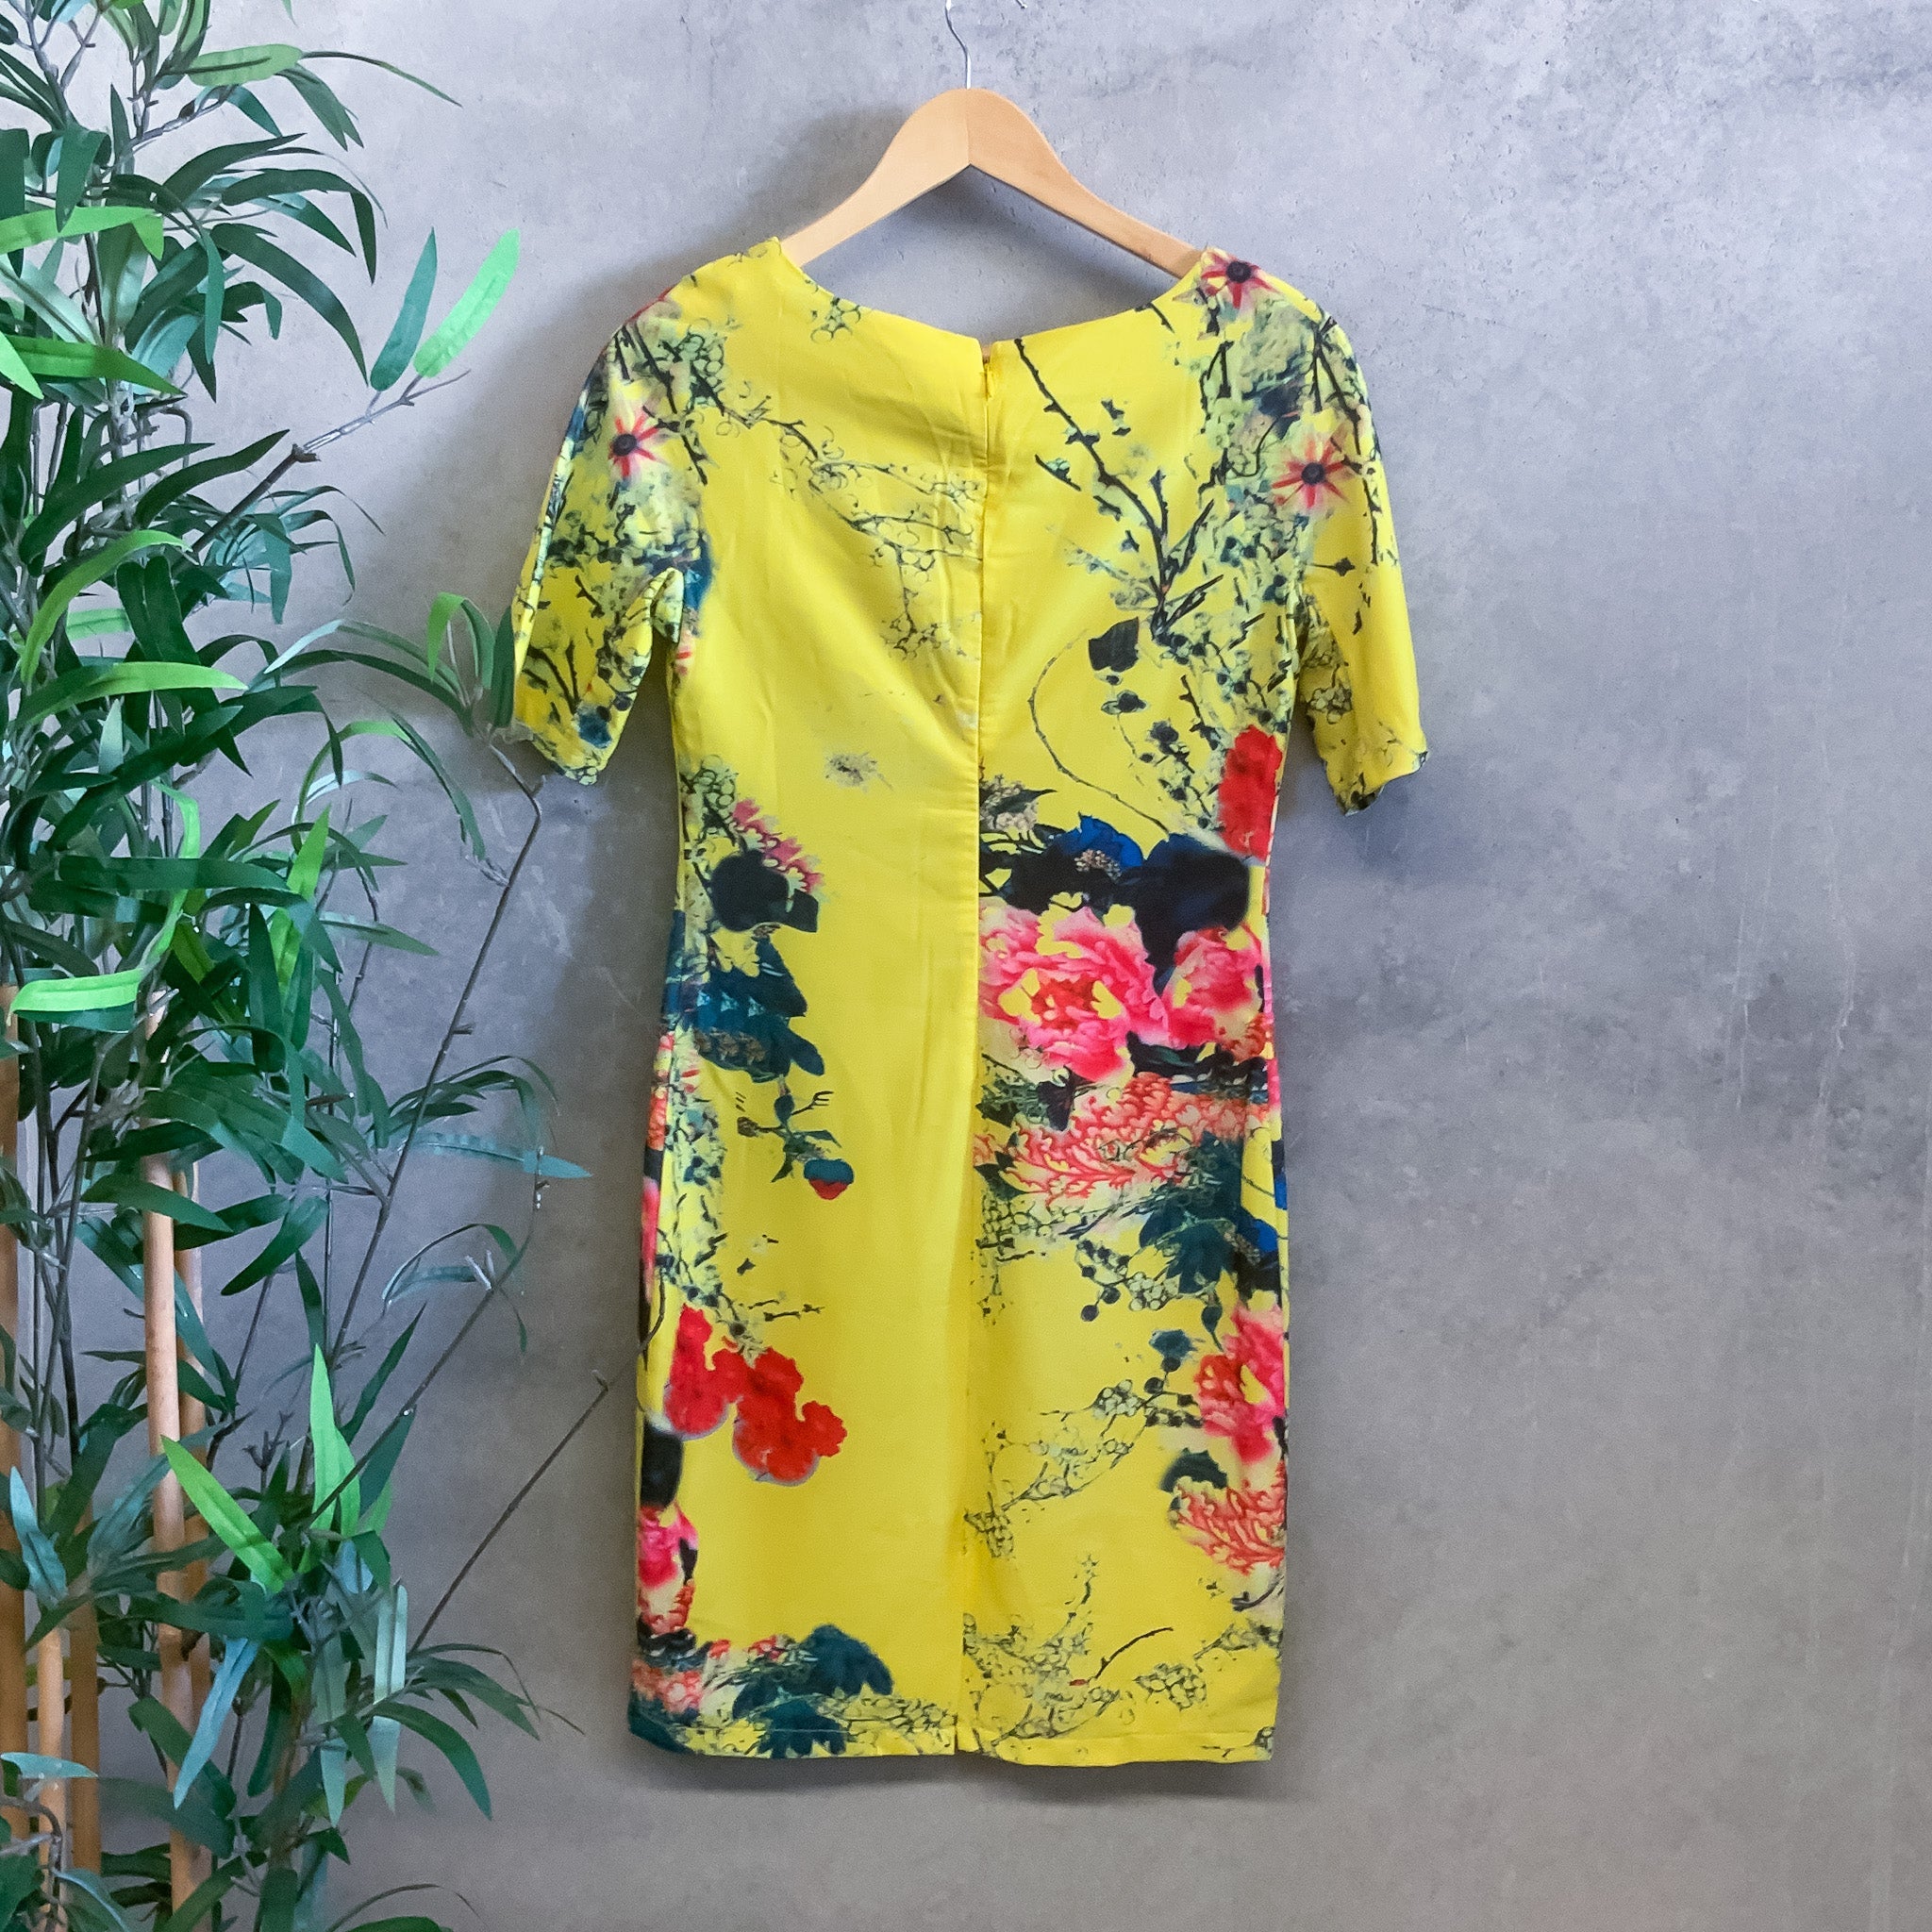 HEL Yellow Pink Short Sleeve Floral Print Shift Dress - Size S